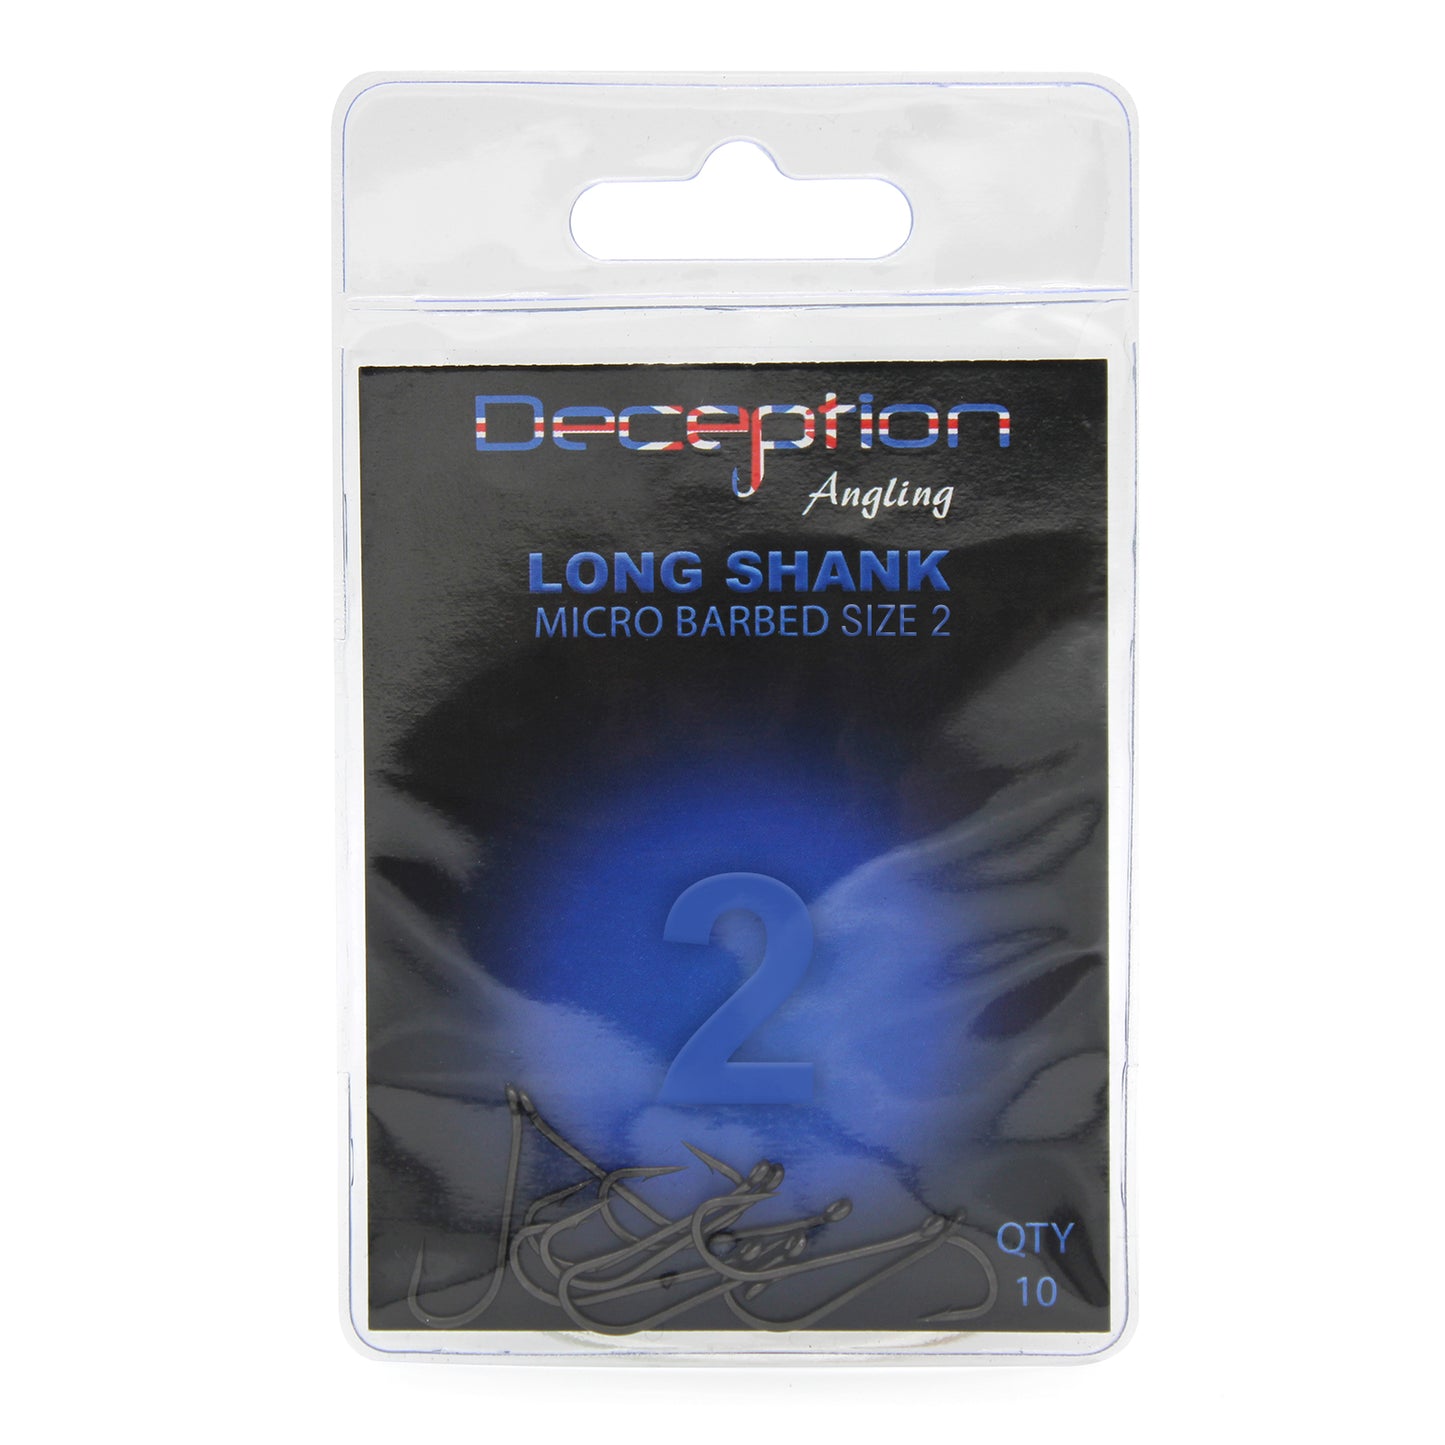 Deception Angling Long Shank Micro Barbed Fishing Hooks Pack of 10 - Size 2